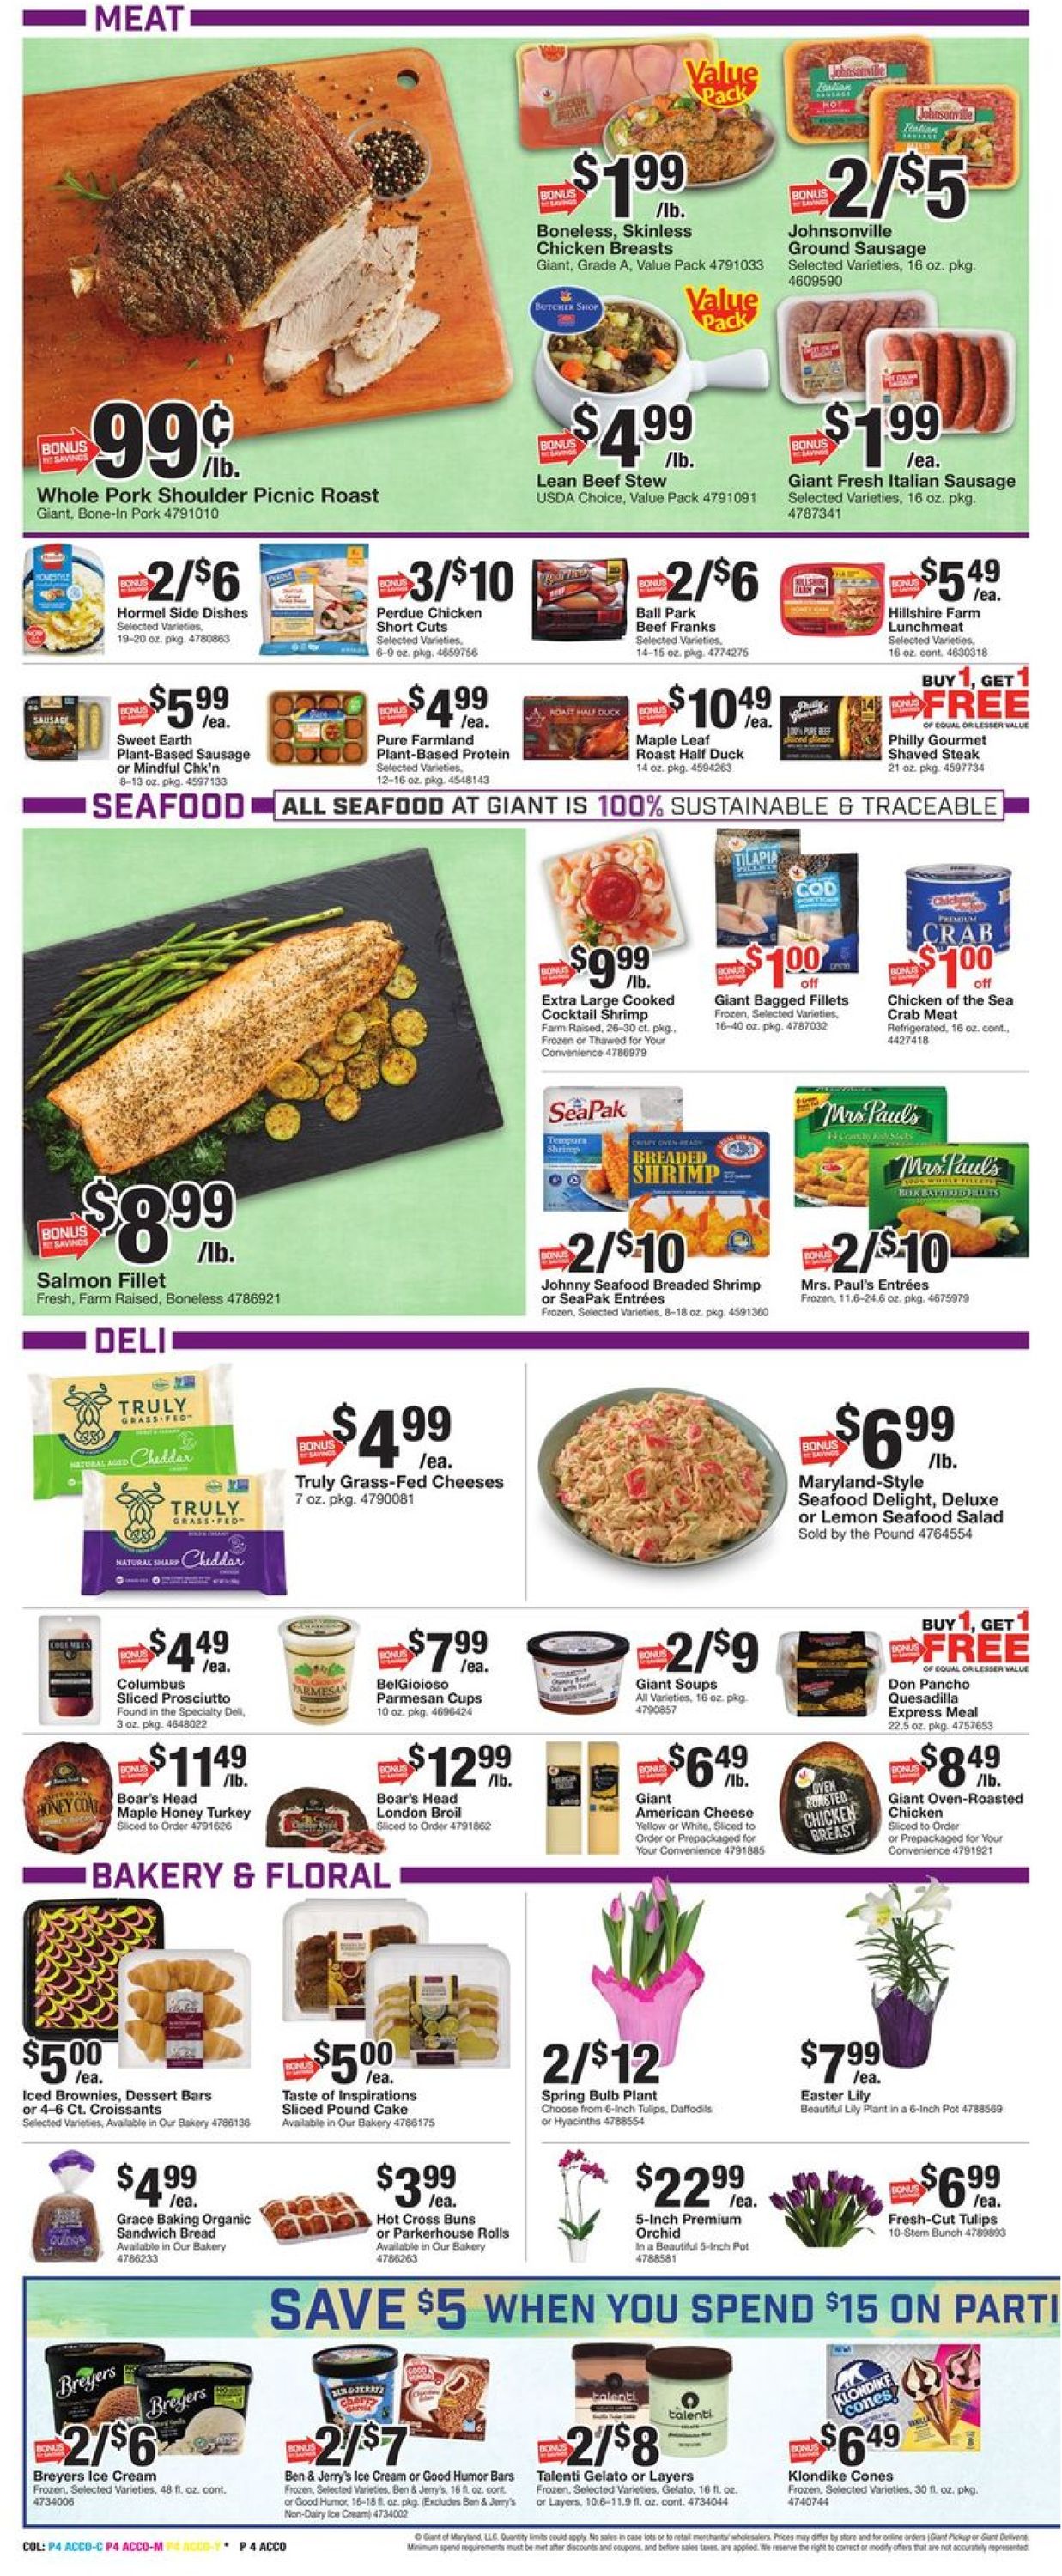 Giant Food - Easter 2021 Ad Weekly Ad Circular - valid 03/26-04/01/2021 (Page 6)